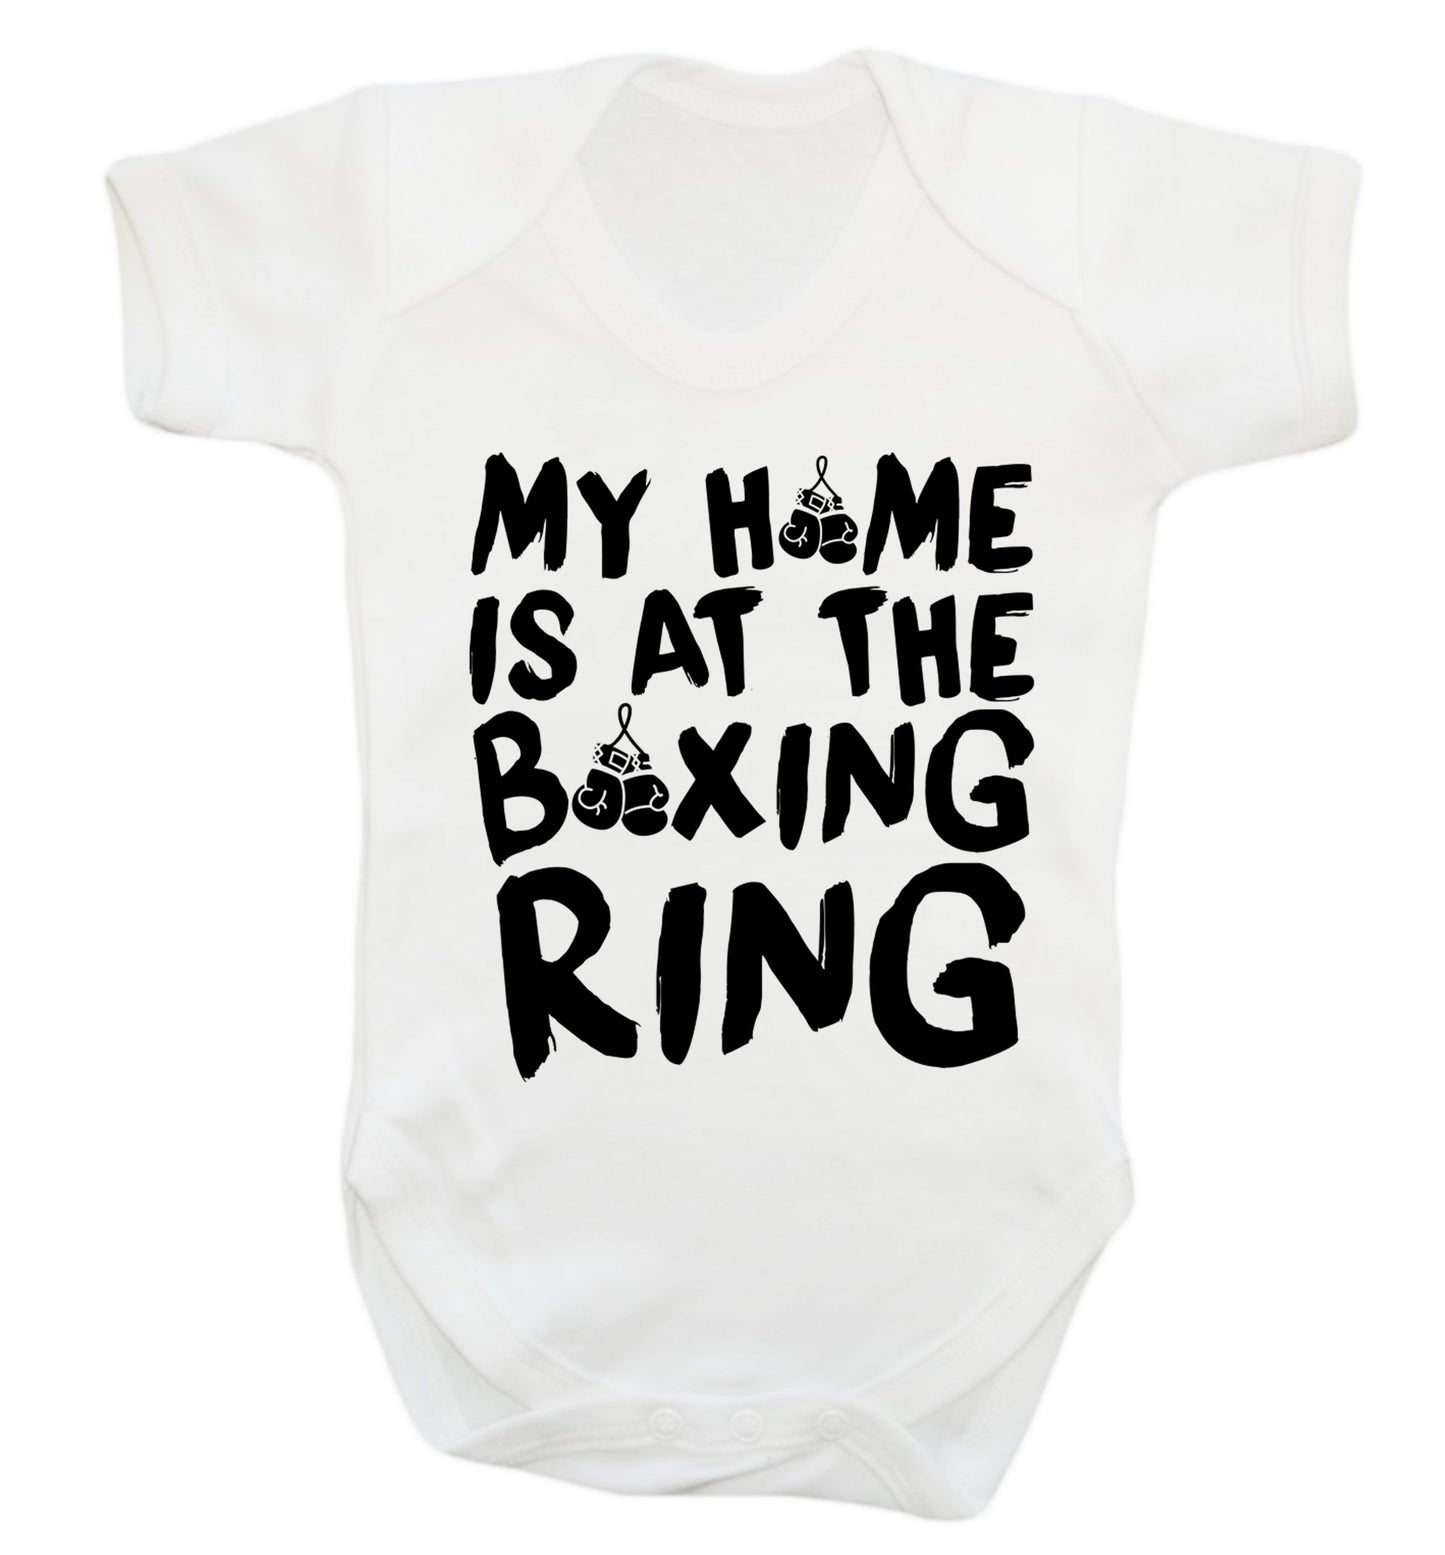 My home is at the boxing ring Baby Vest white 18-24 months